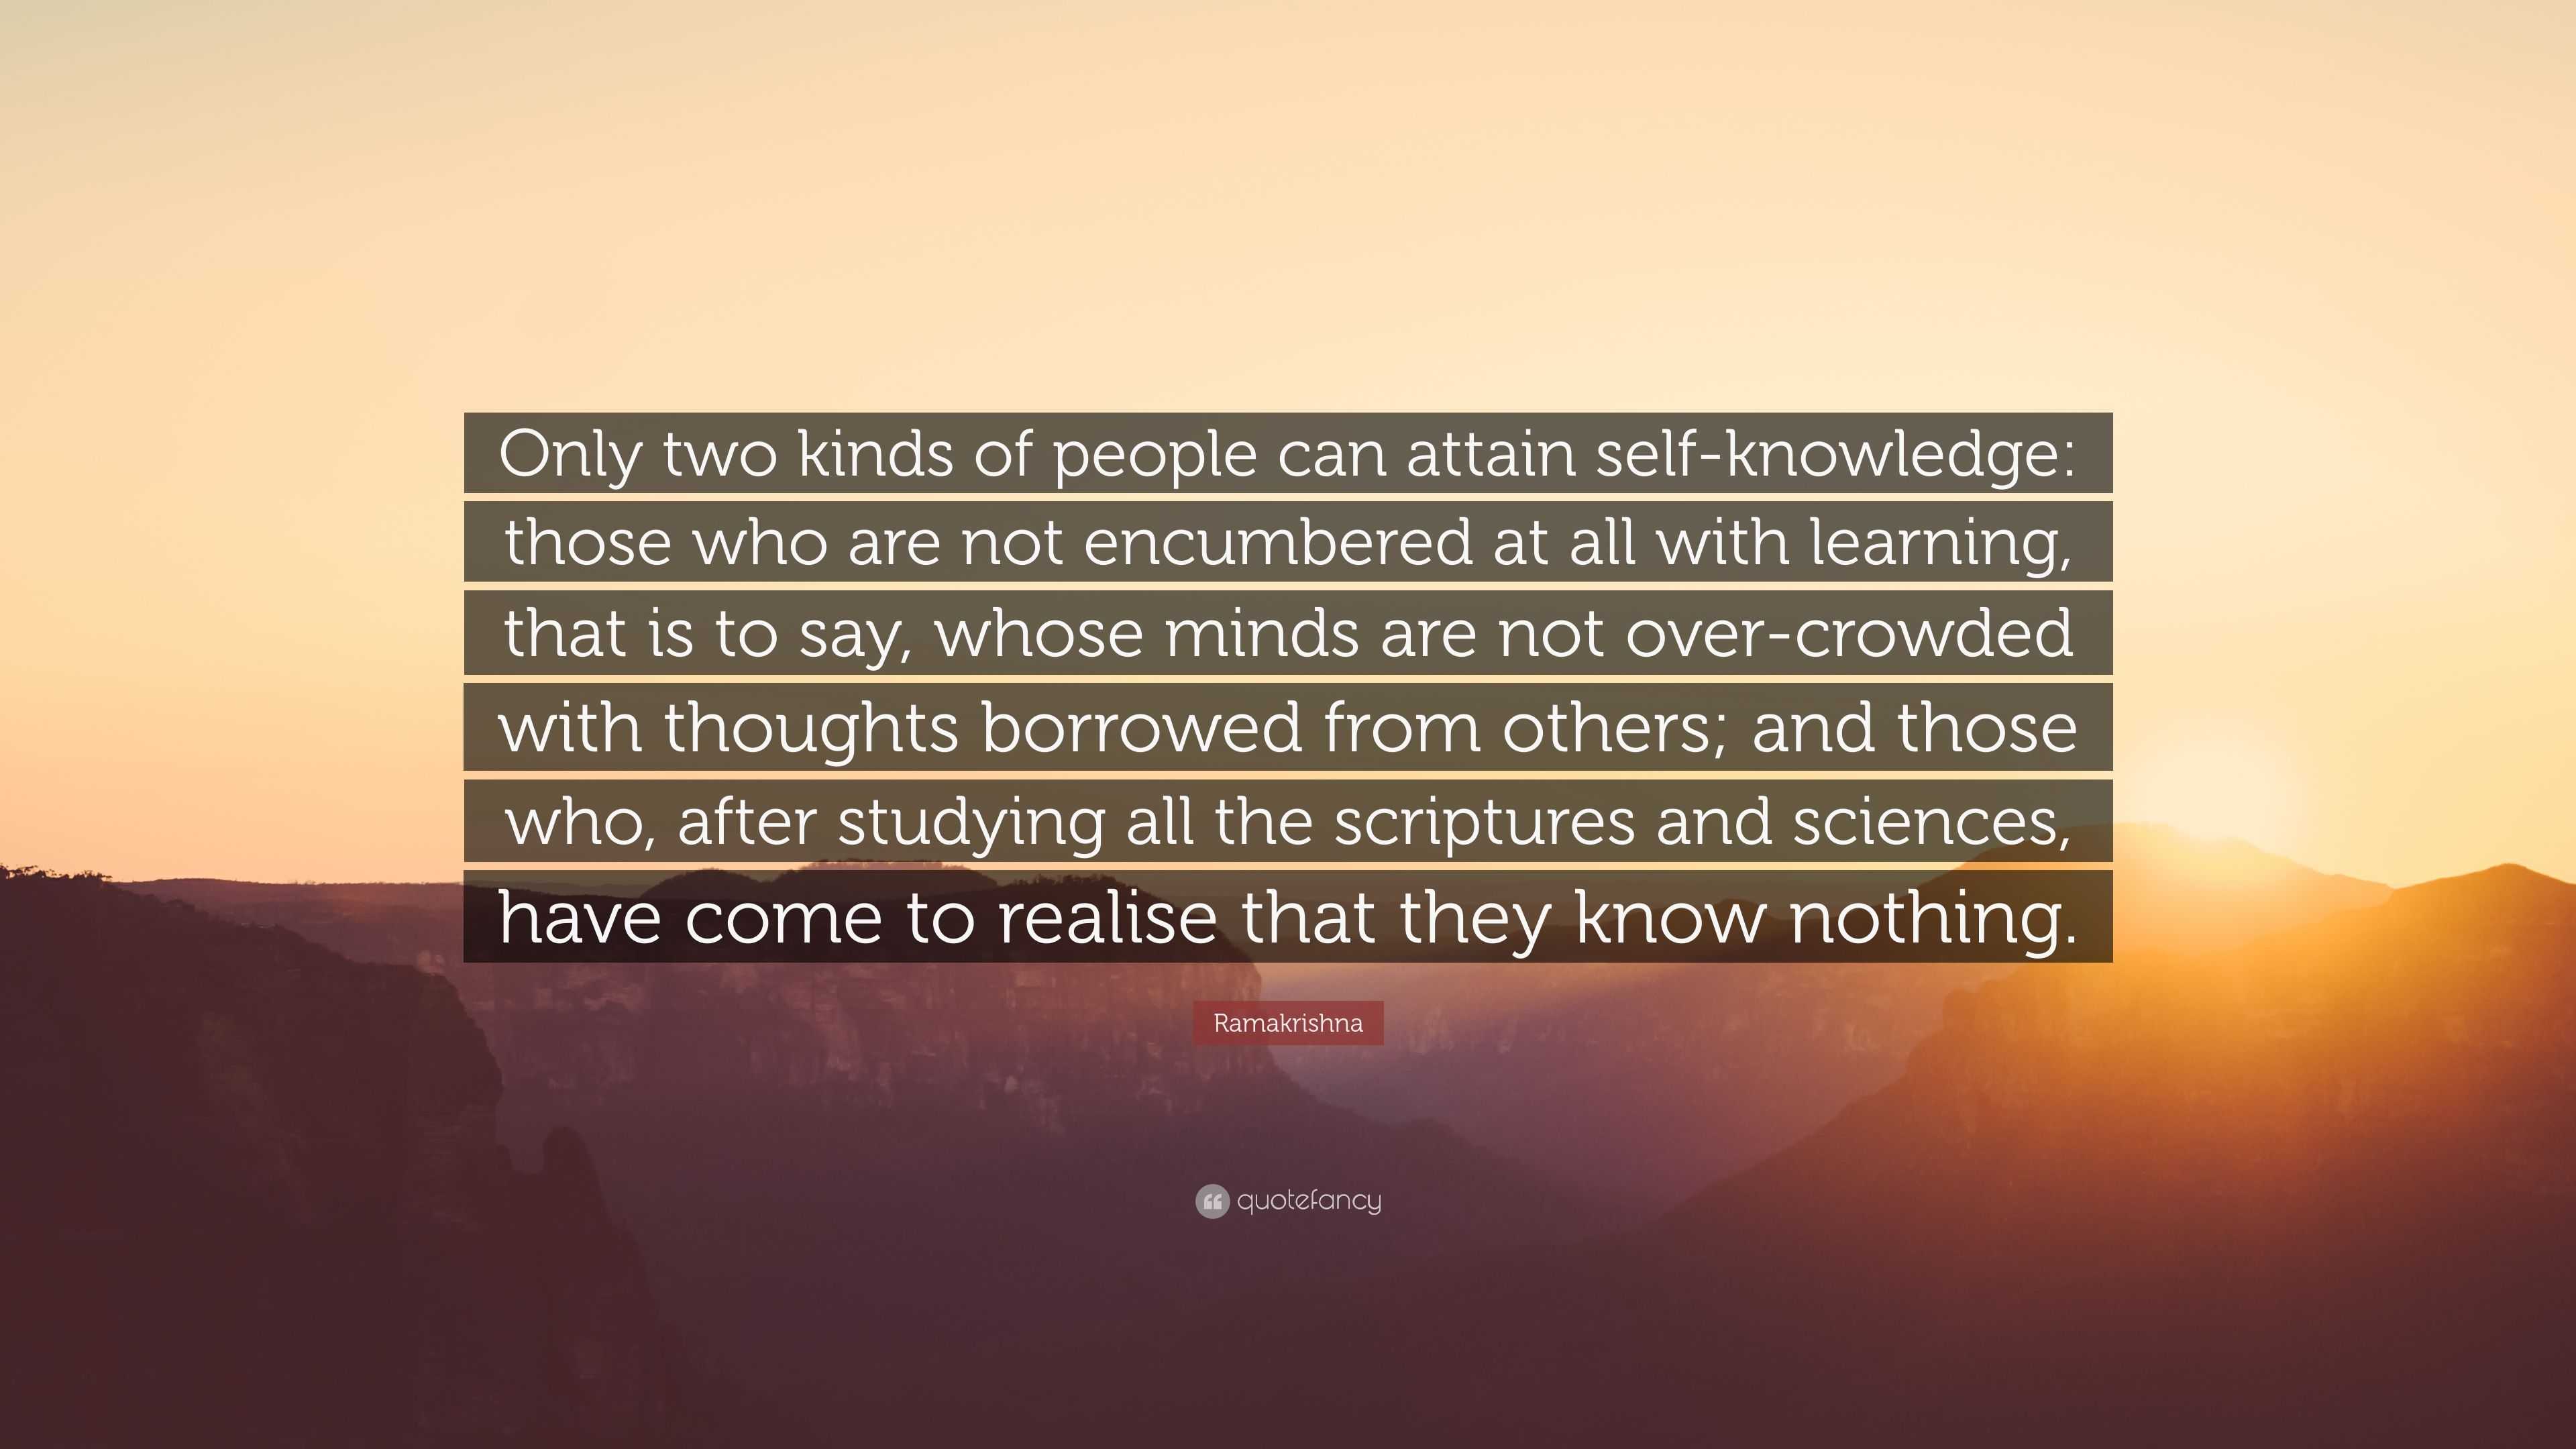 Ramakrishna Quote: “Only two kinds of people can attain self-knowledge ...